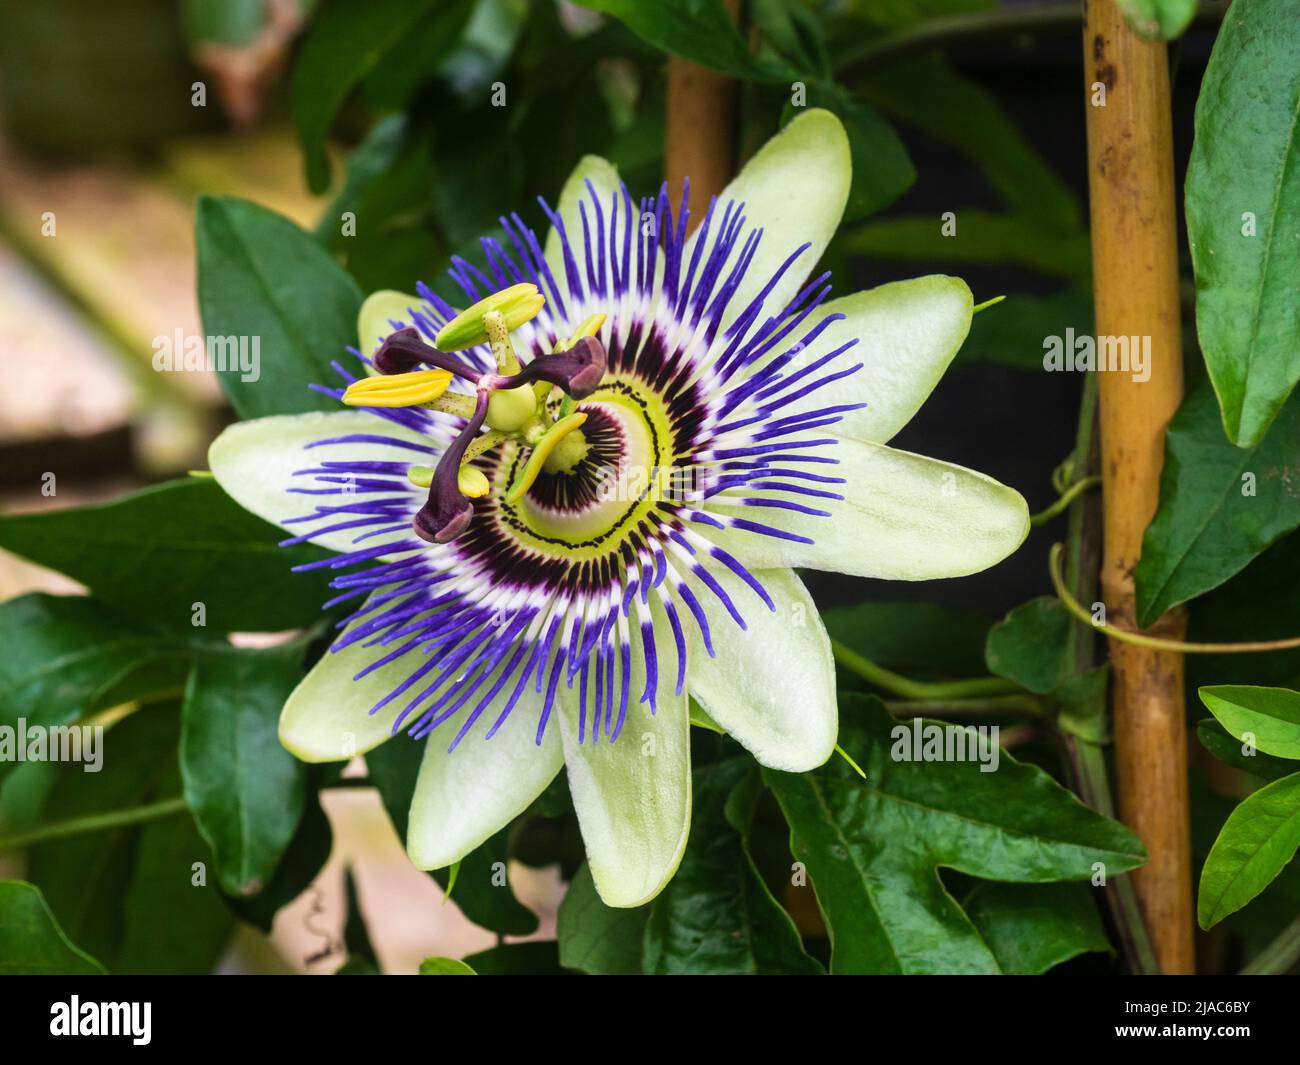 Ornate blue and white flower of the exotic tendril climbing passion flower, Passiflora caerulea Stock Photo